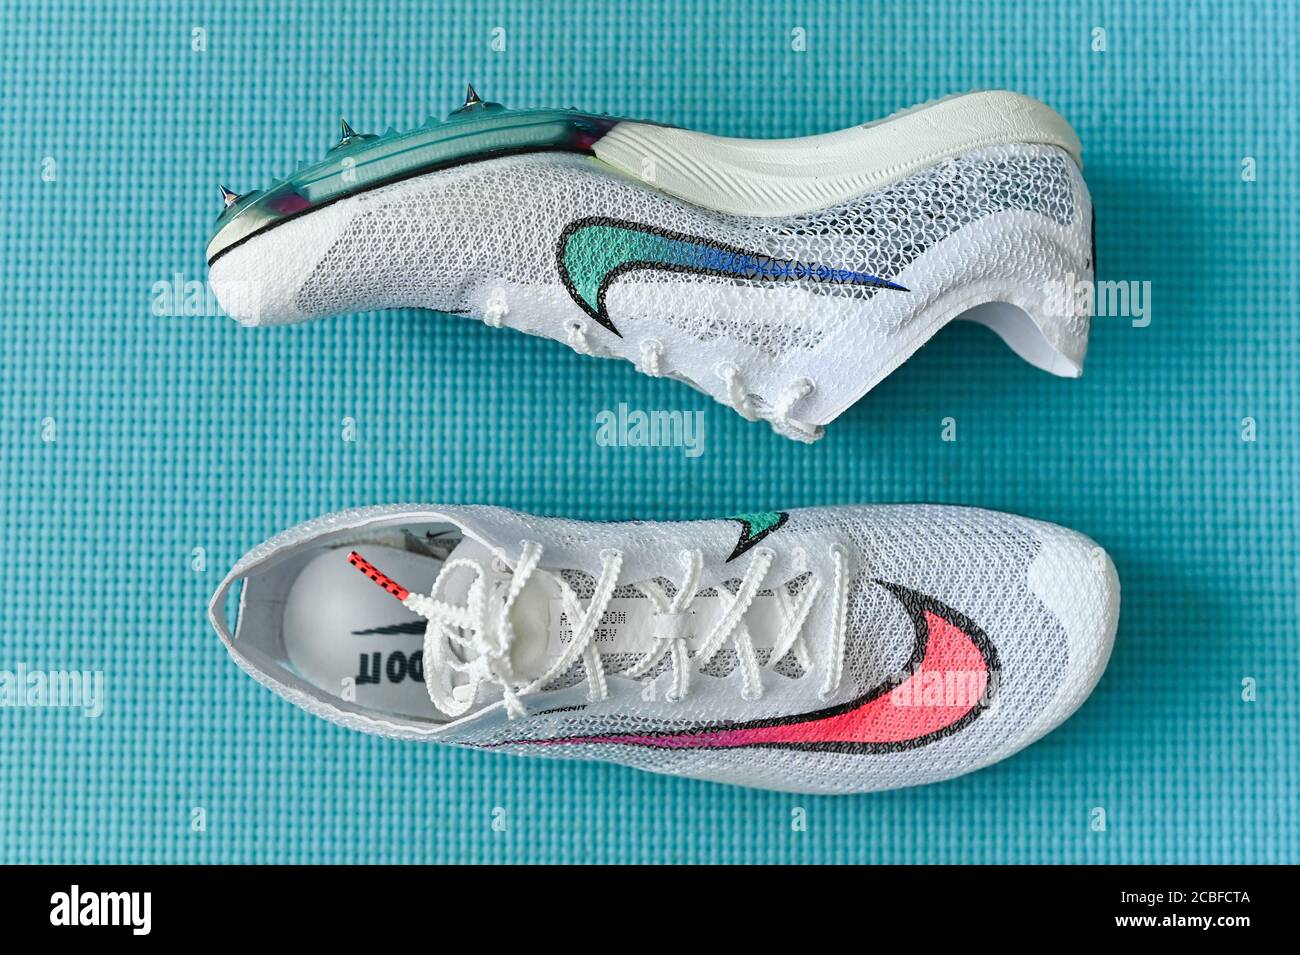 nike air zoom victory track spikes